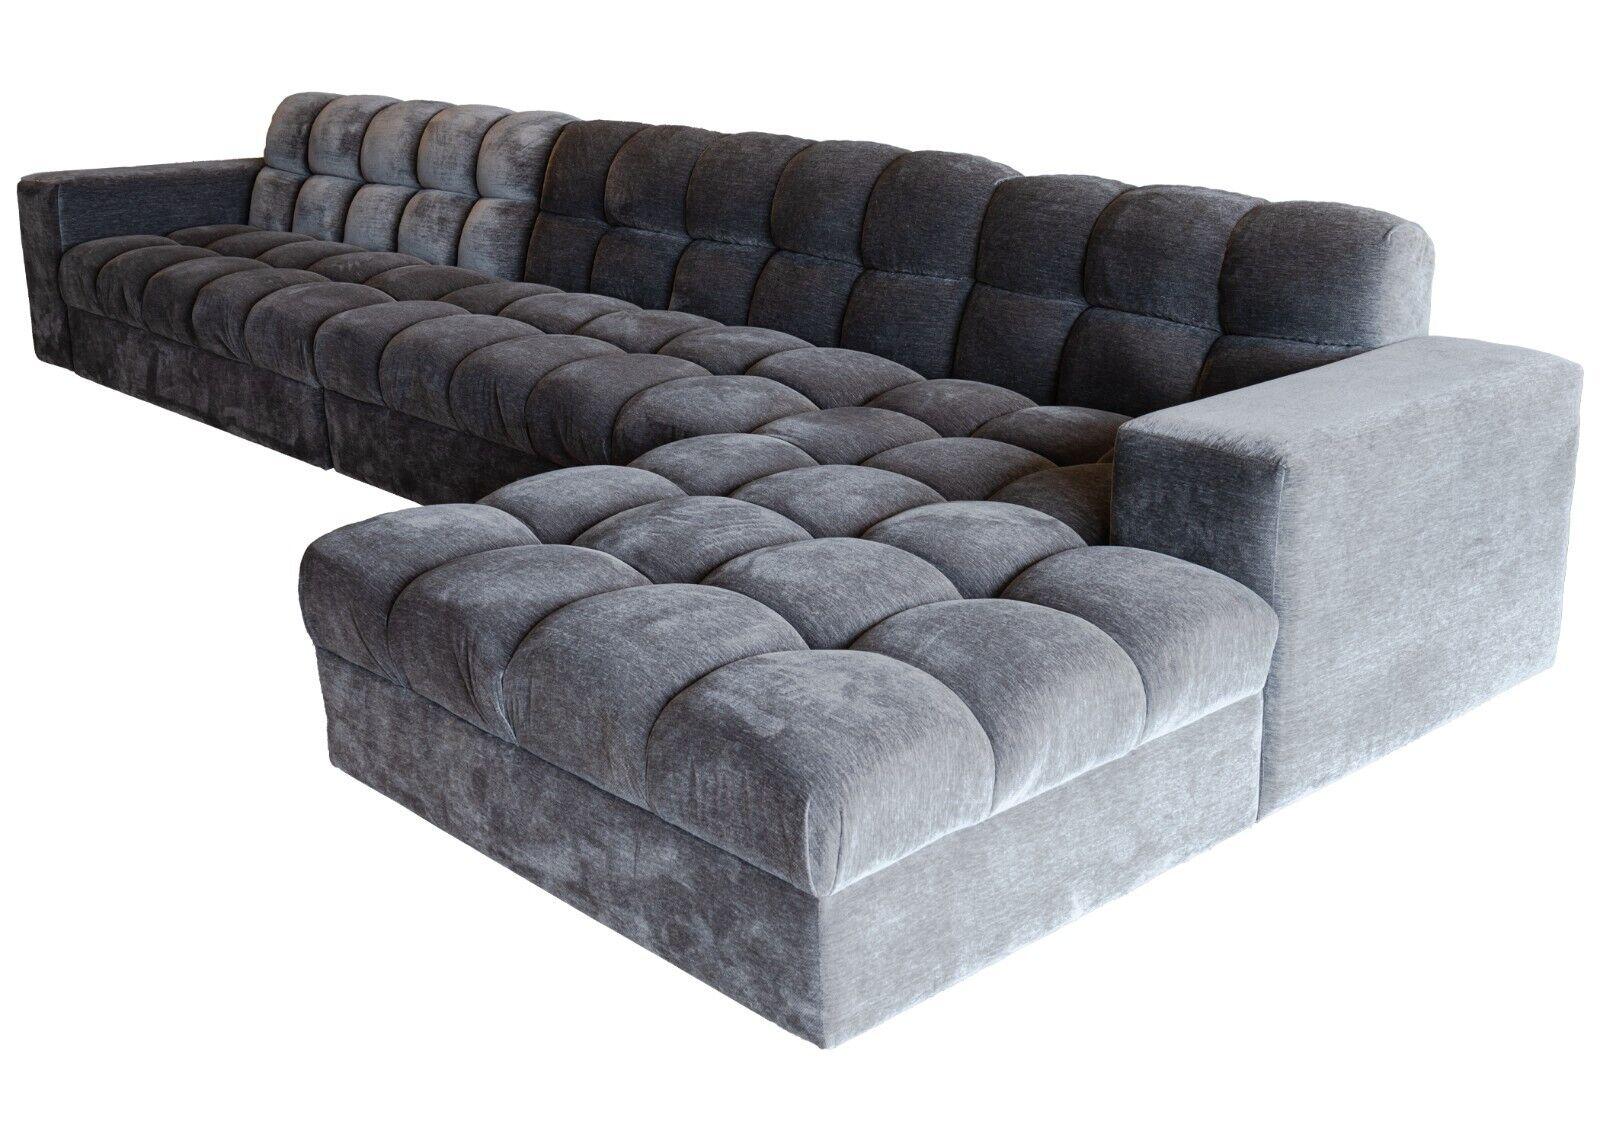 A contemporary modern custom made dark grey velvet tufted sectional sofa by Kravet. This outstanding sectional sofa features a unique tufted cushion design on both the seat and the backing. The texture this design creates provides for a wonderfully